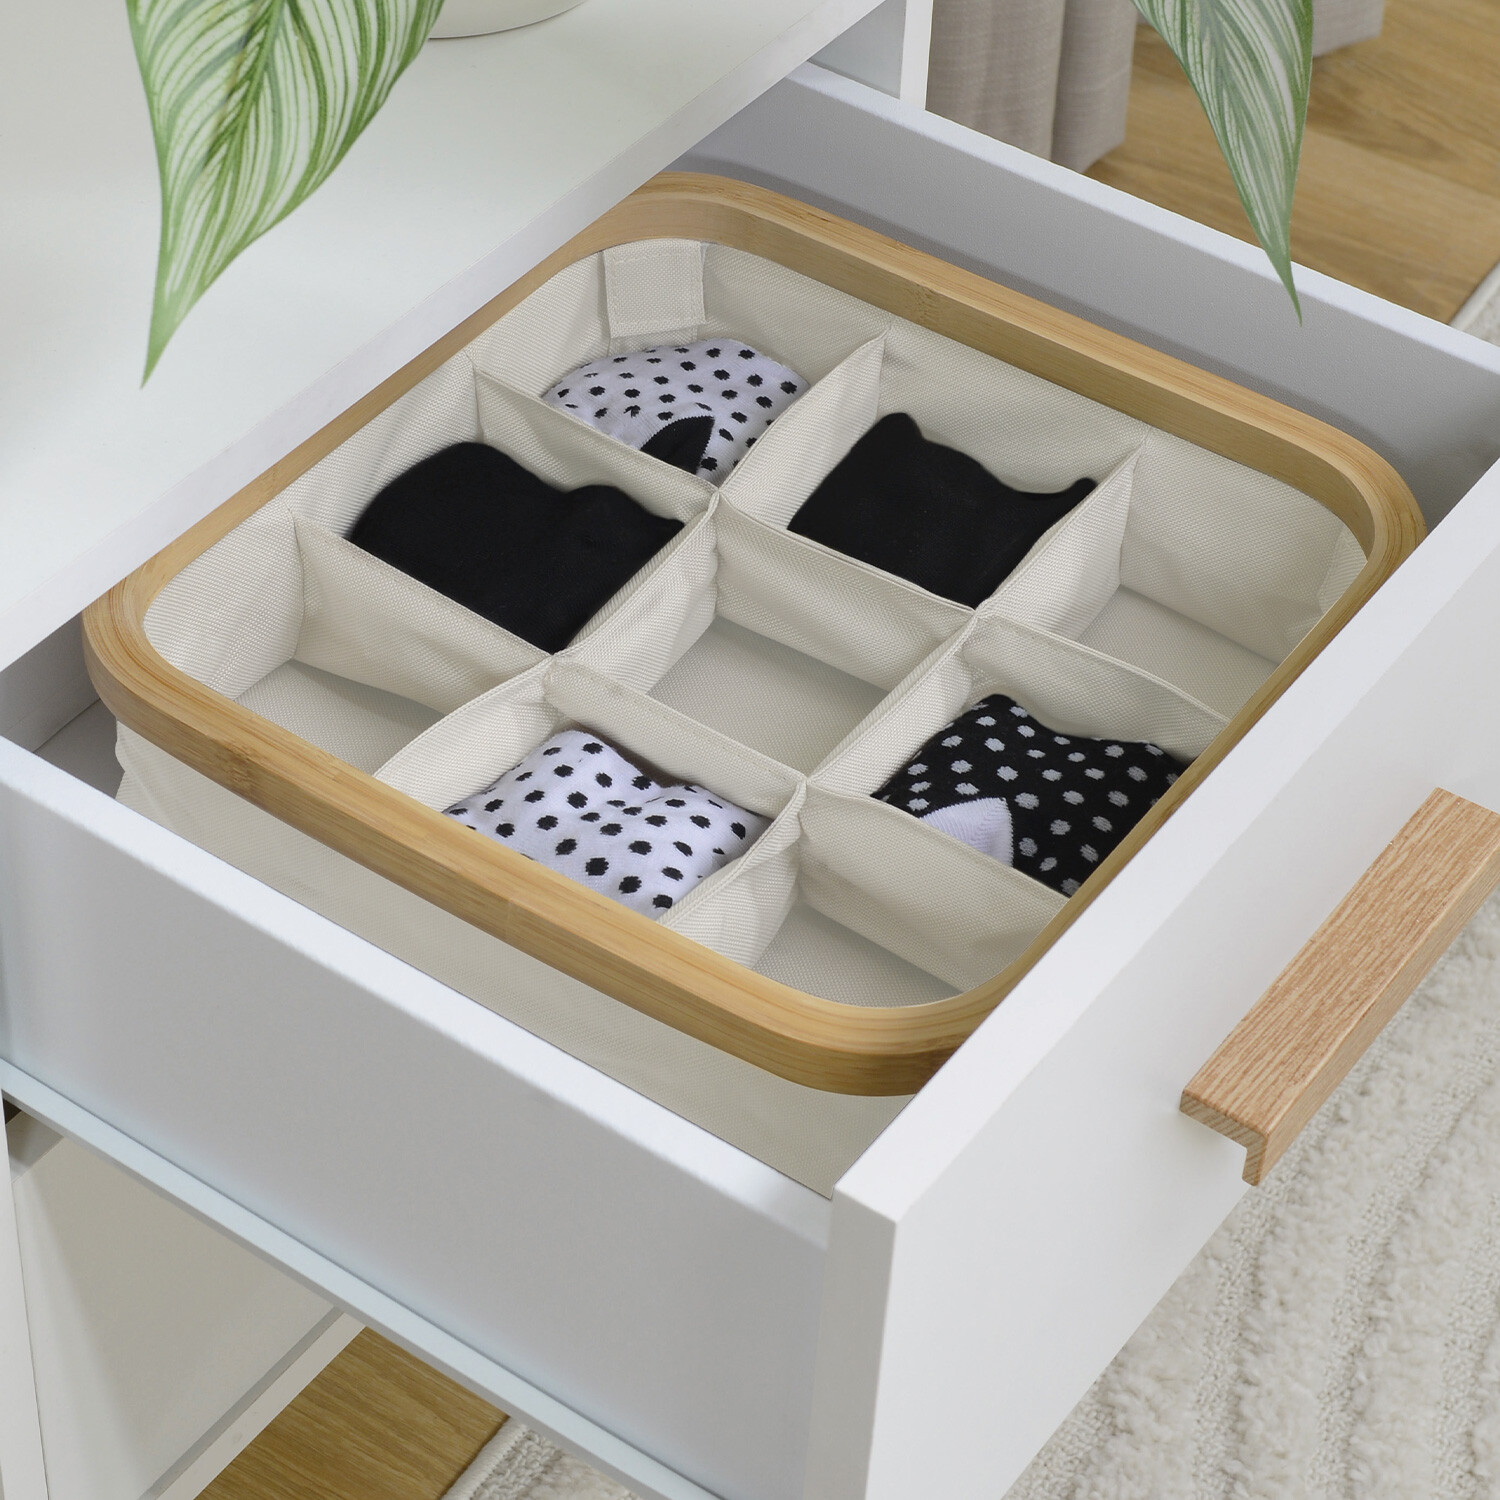 Bamboo Frame Storage Box - Linen / 9 Dividers Image